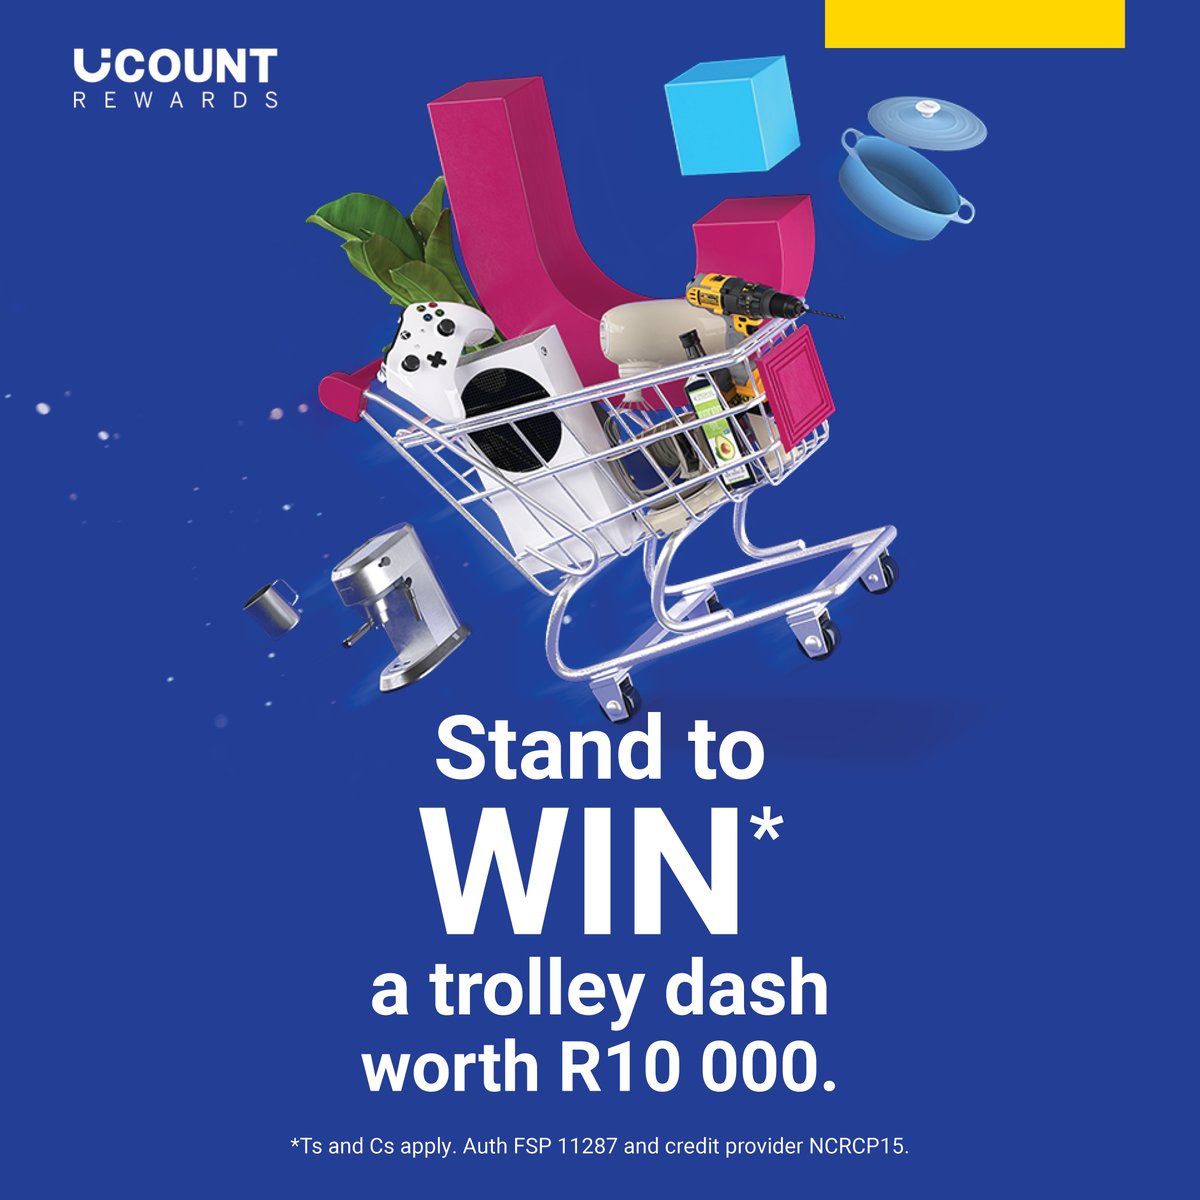 Shop Builders for a wide range of essentials to help you make today Do Day. Stand a chance to WIN* a R10,000 trolley dash with UCount Rewards and Builders. Spend R500 on your Standard Bank card or redeem your UCount Rewards points for a R500 purchase to enter. Ts & Cs apply.